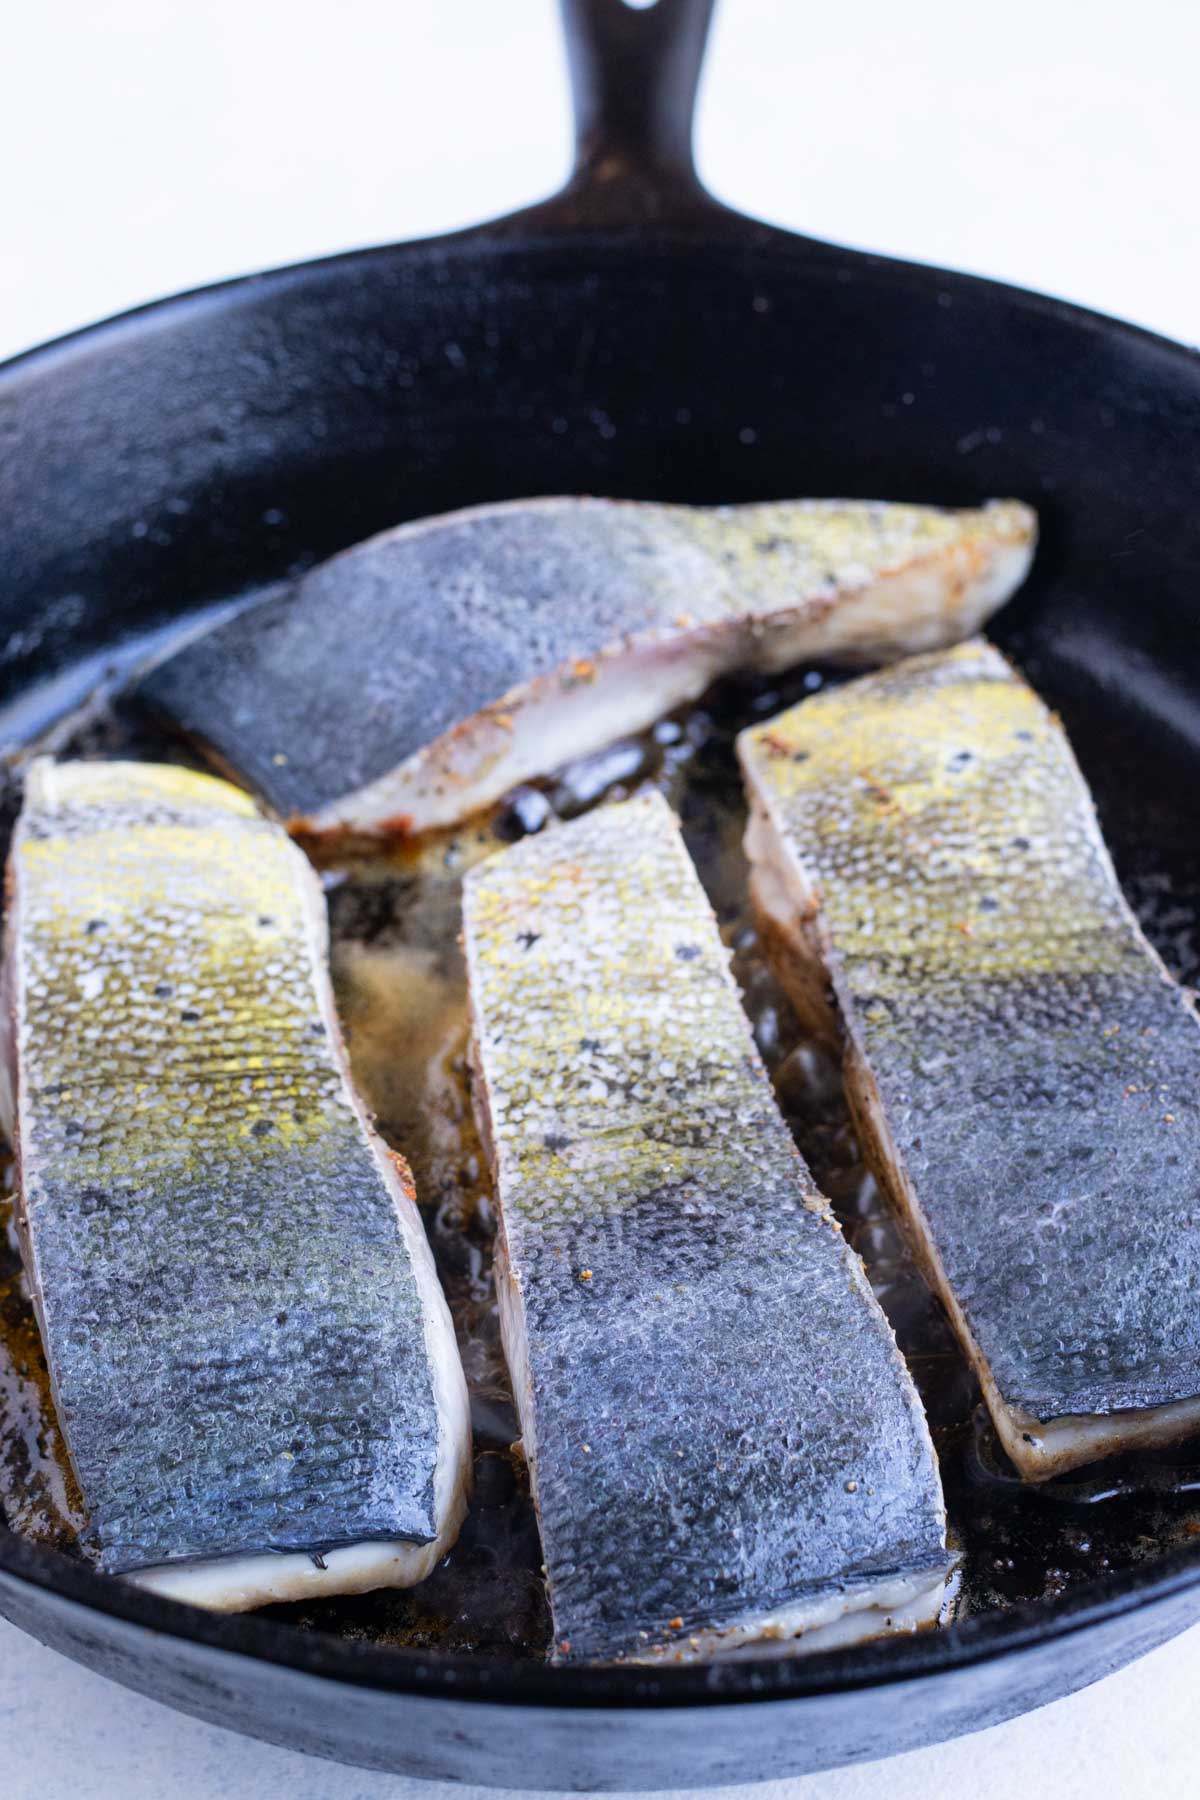 Pieces of Mahi Mahi are cooked in the skillet skin-side up.